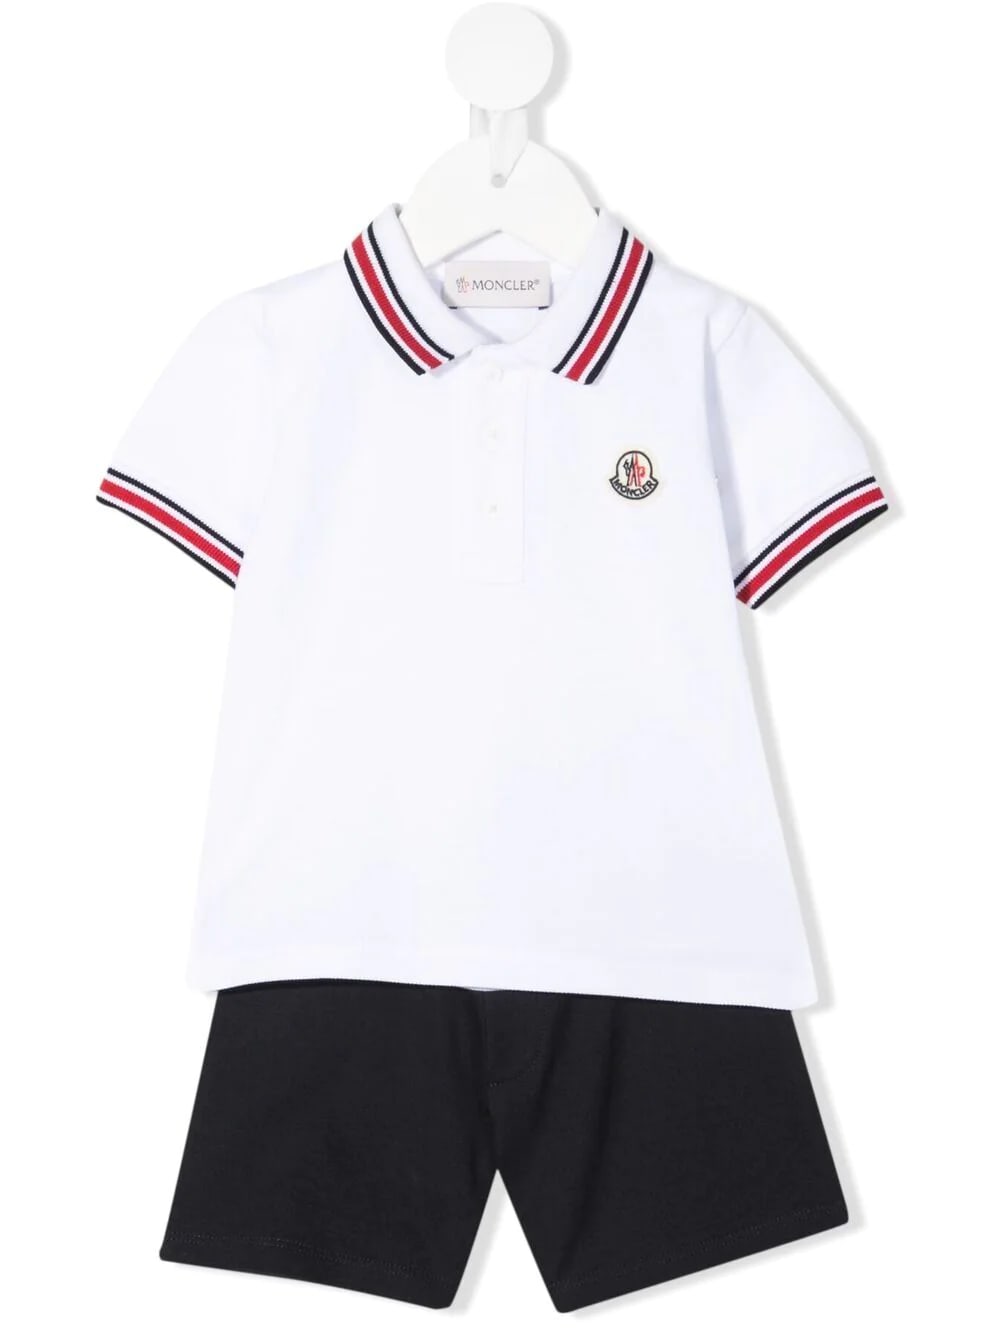 MONCLER WHITE AND BLUE POLO SHIRT AND SHORTS NEWBORN SET,11886483